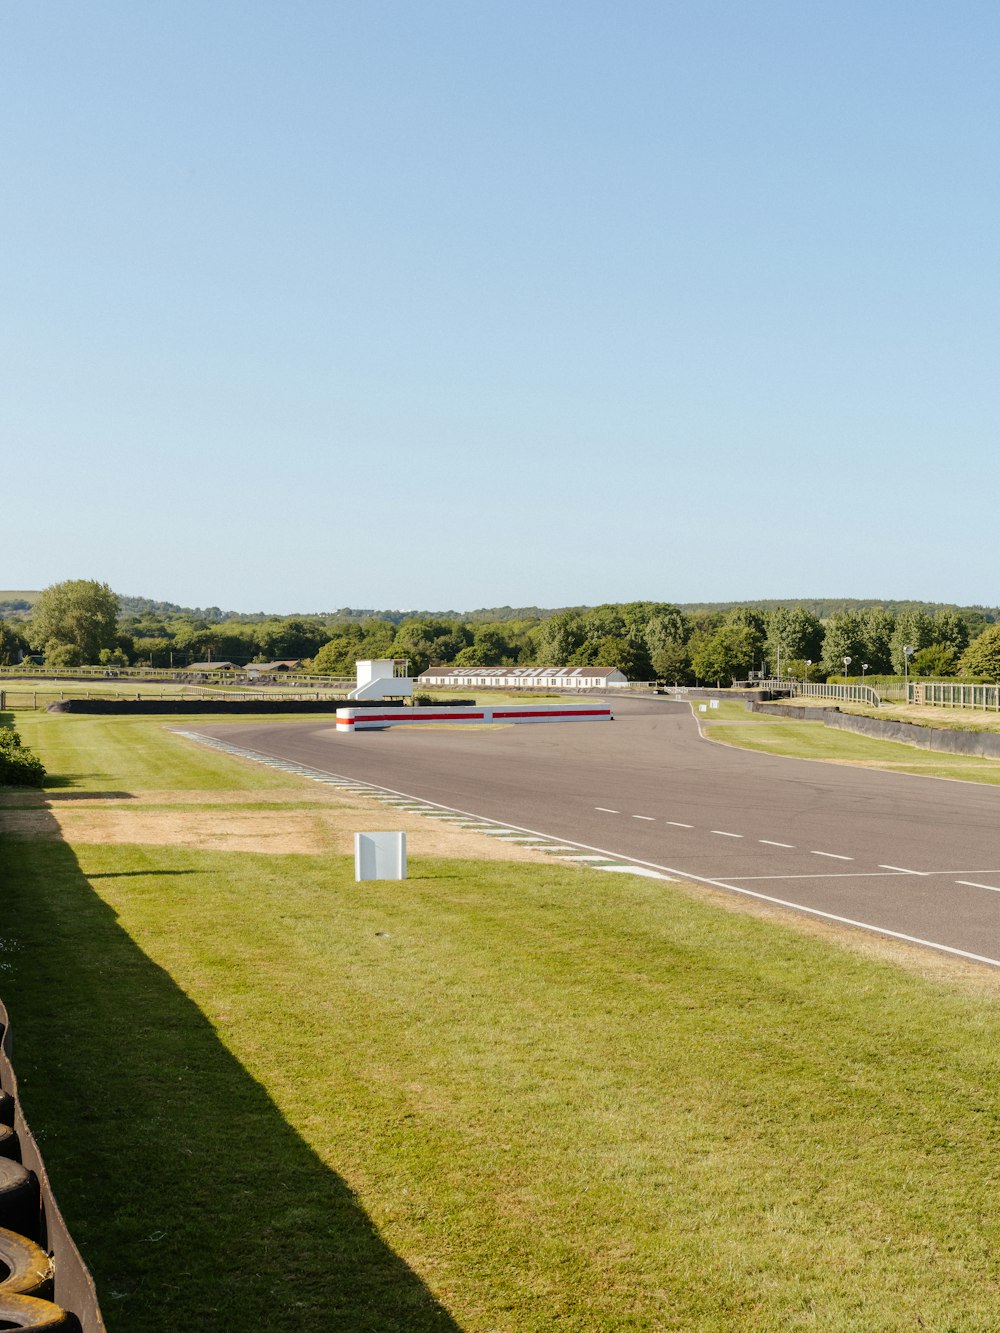 a view of a race track from a distance